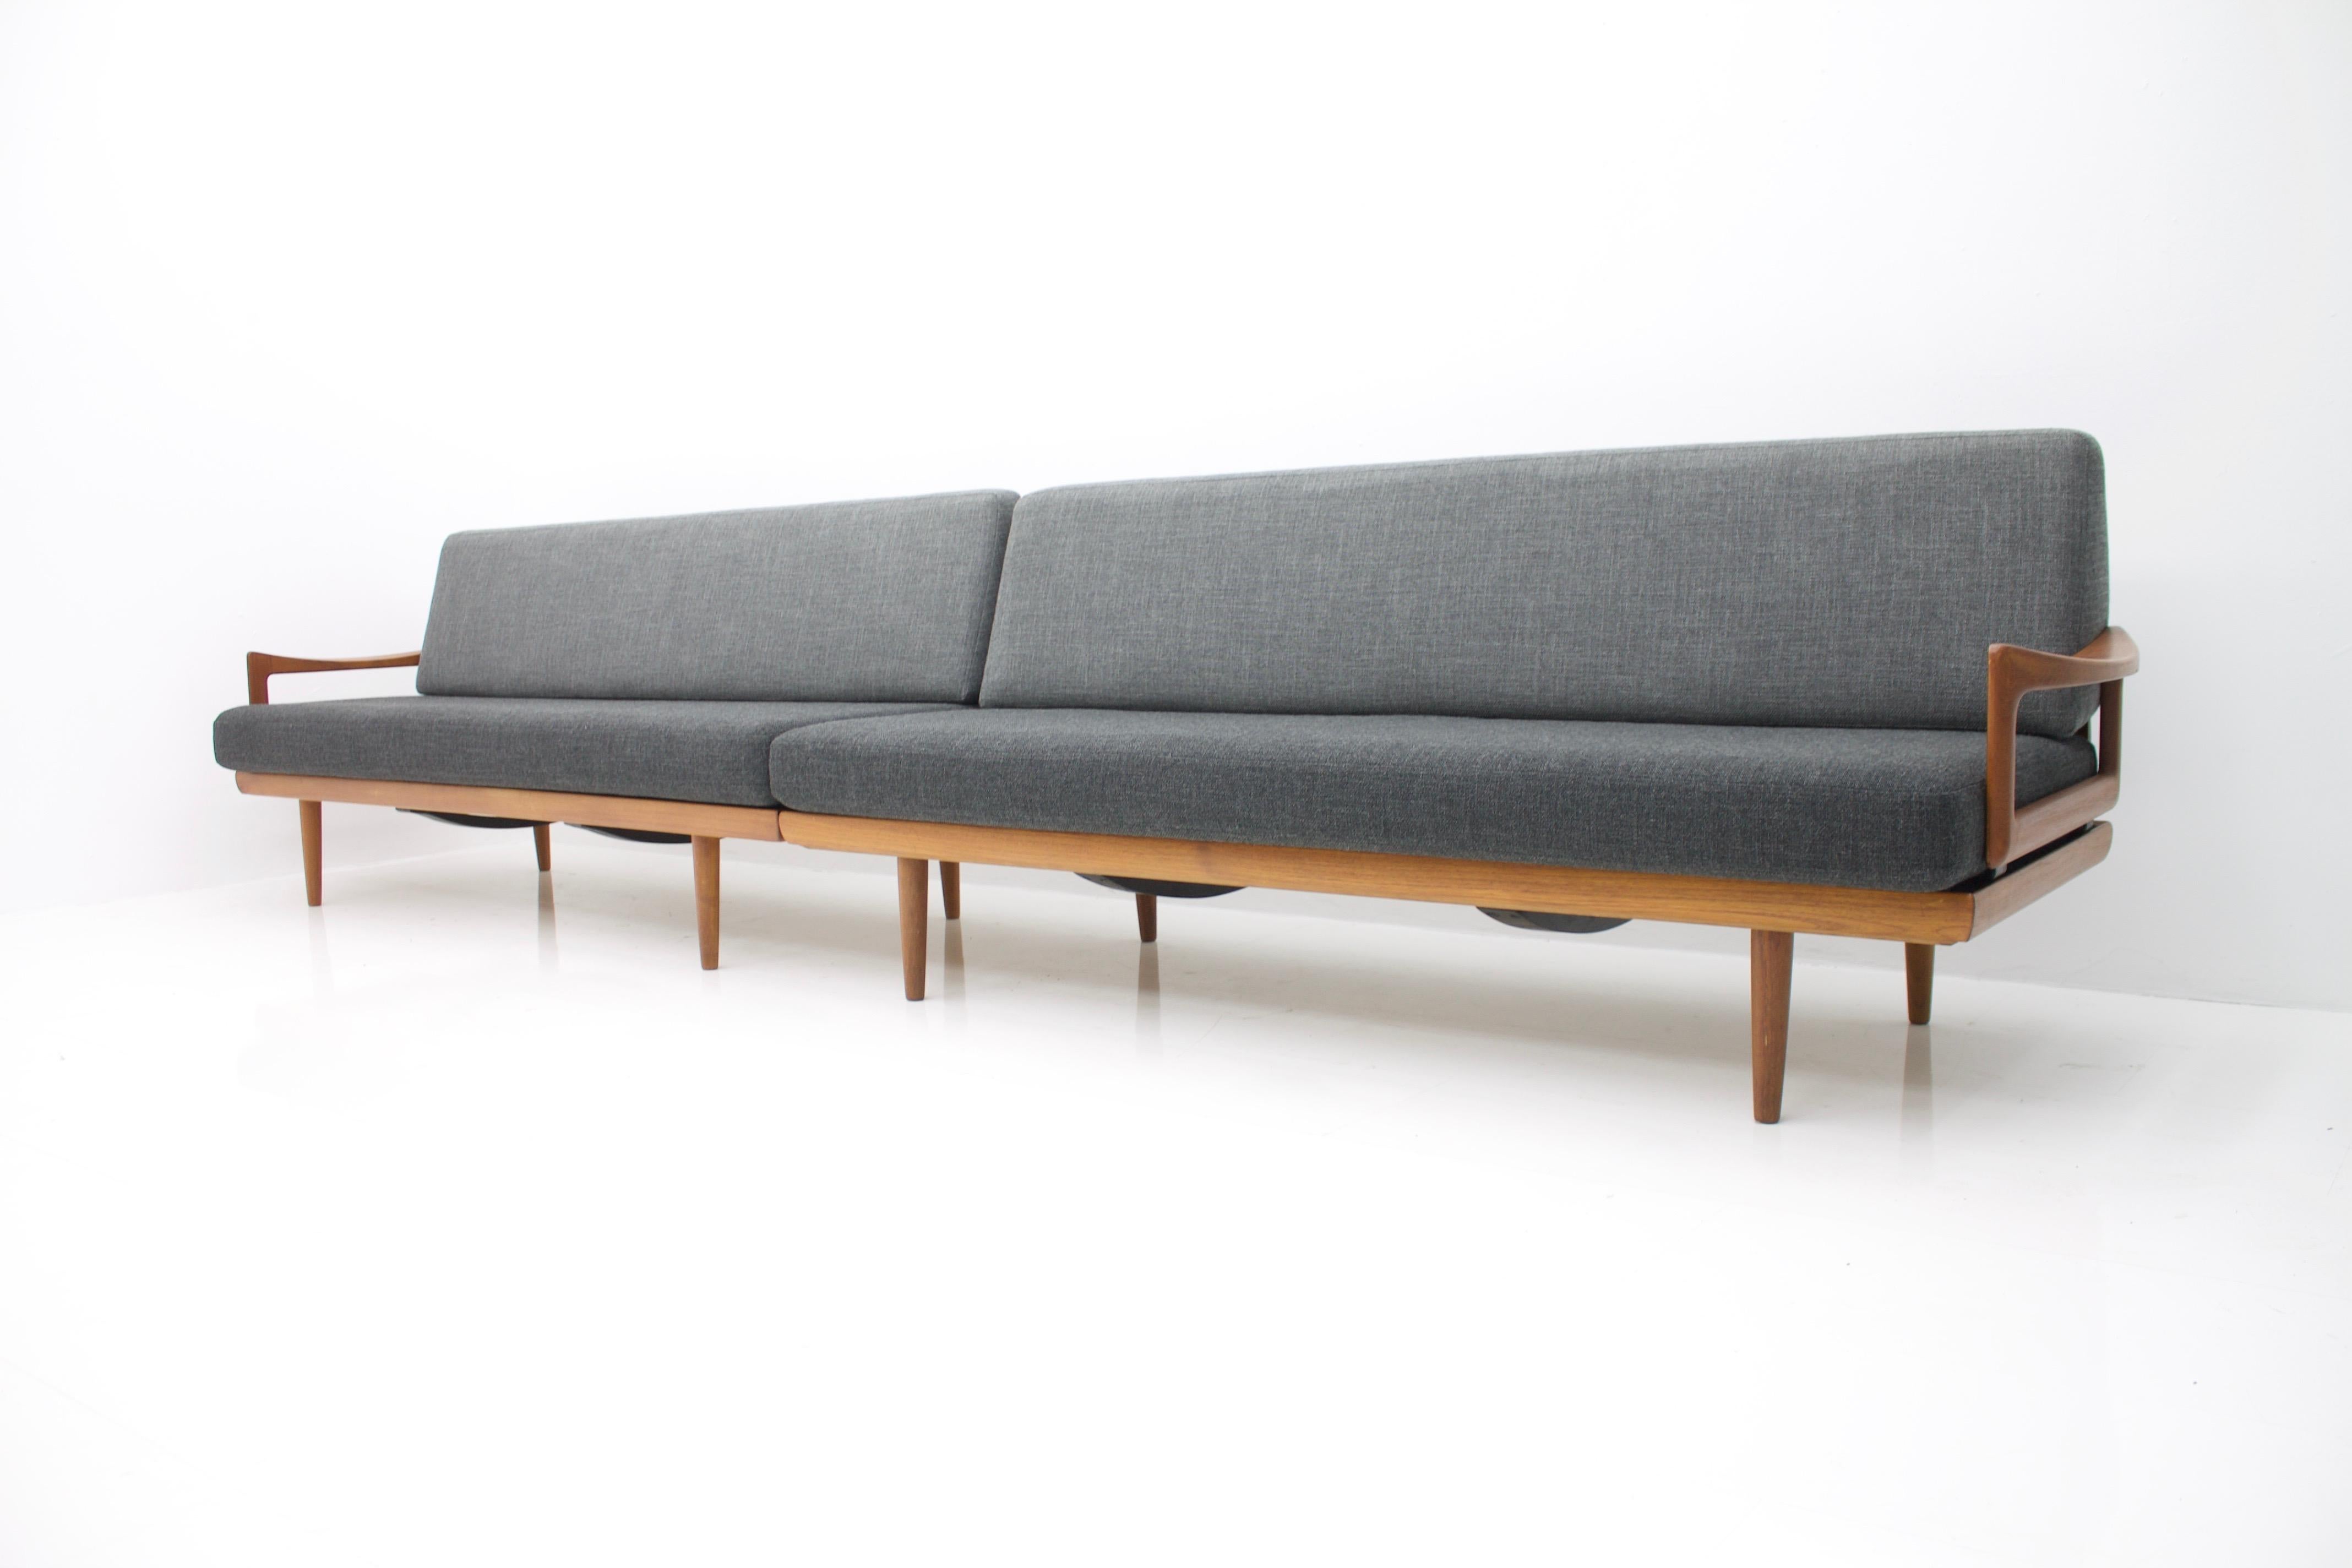 Rare set of two sofas by Tove & Edvard Kindt-Larsen for Gustav Barhus, Norway. Two identical sofas can be placed to a long bench or separately. The armrests can be dismantled on both sides and also be placed as a single daybeds or as a long